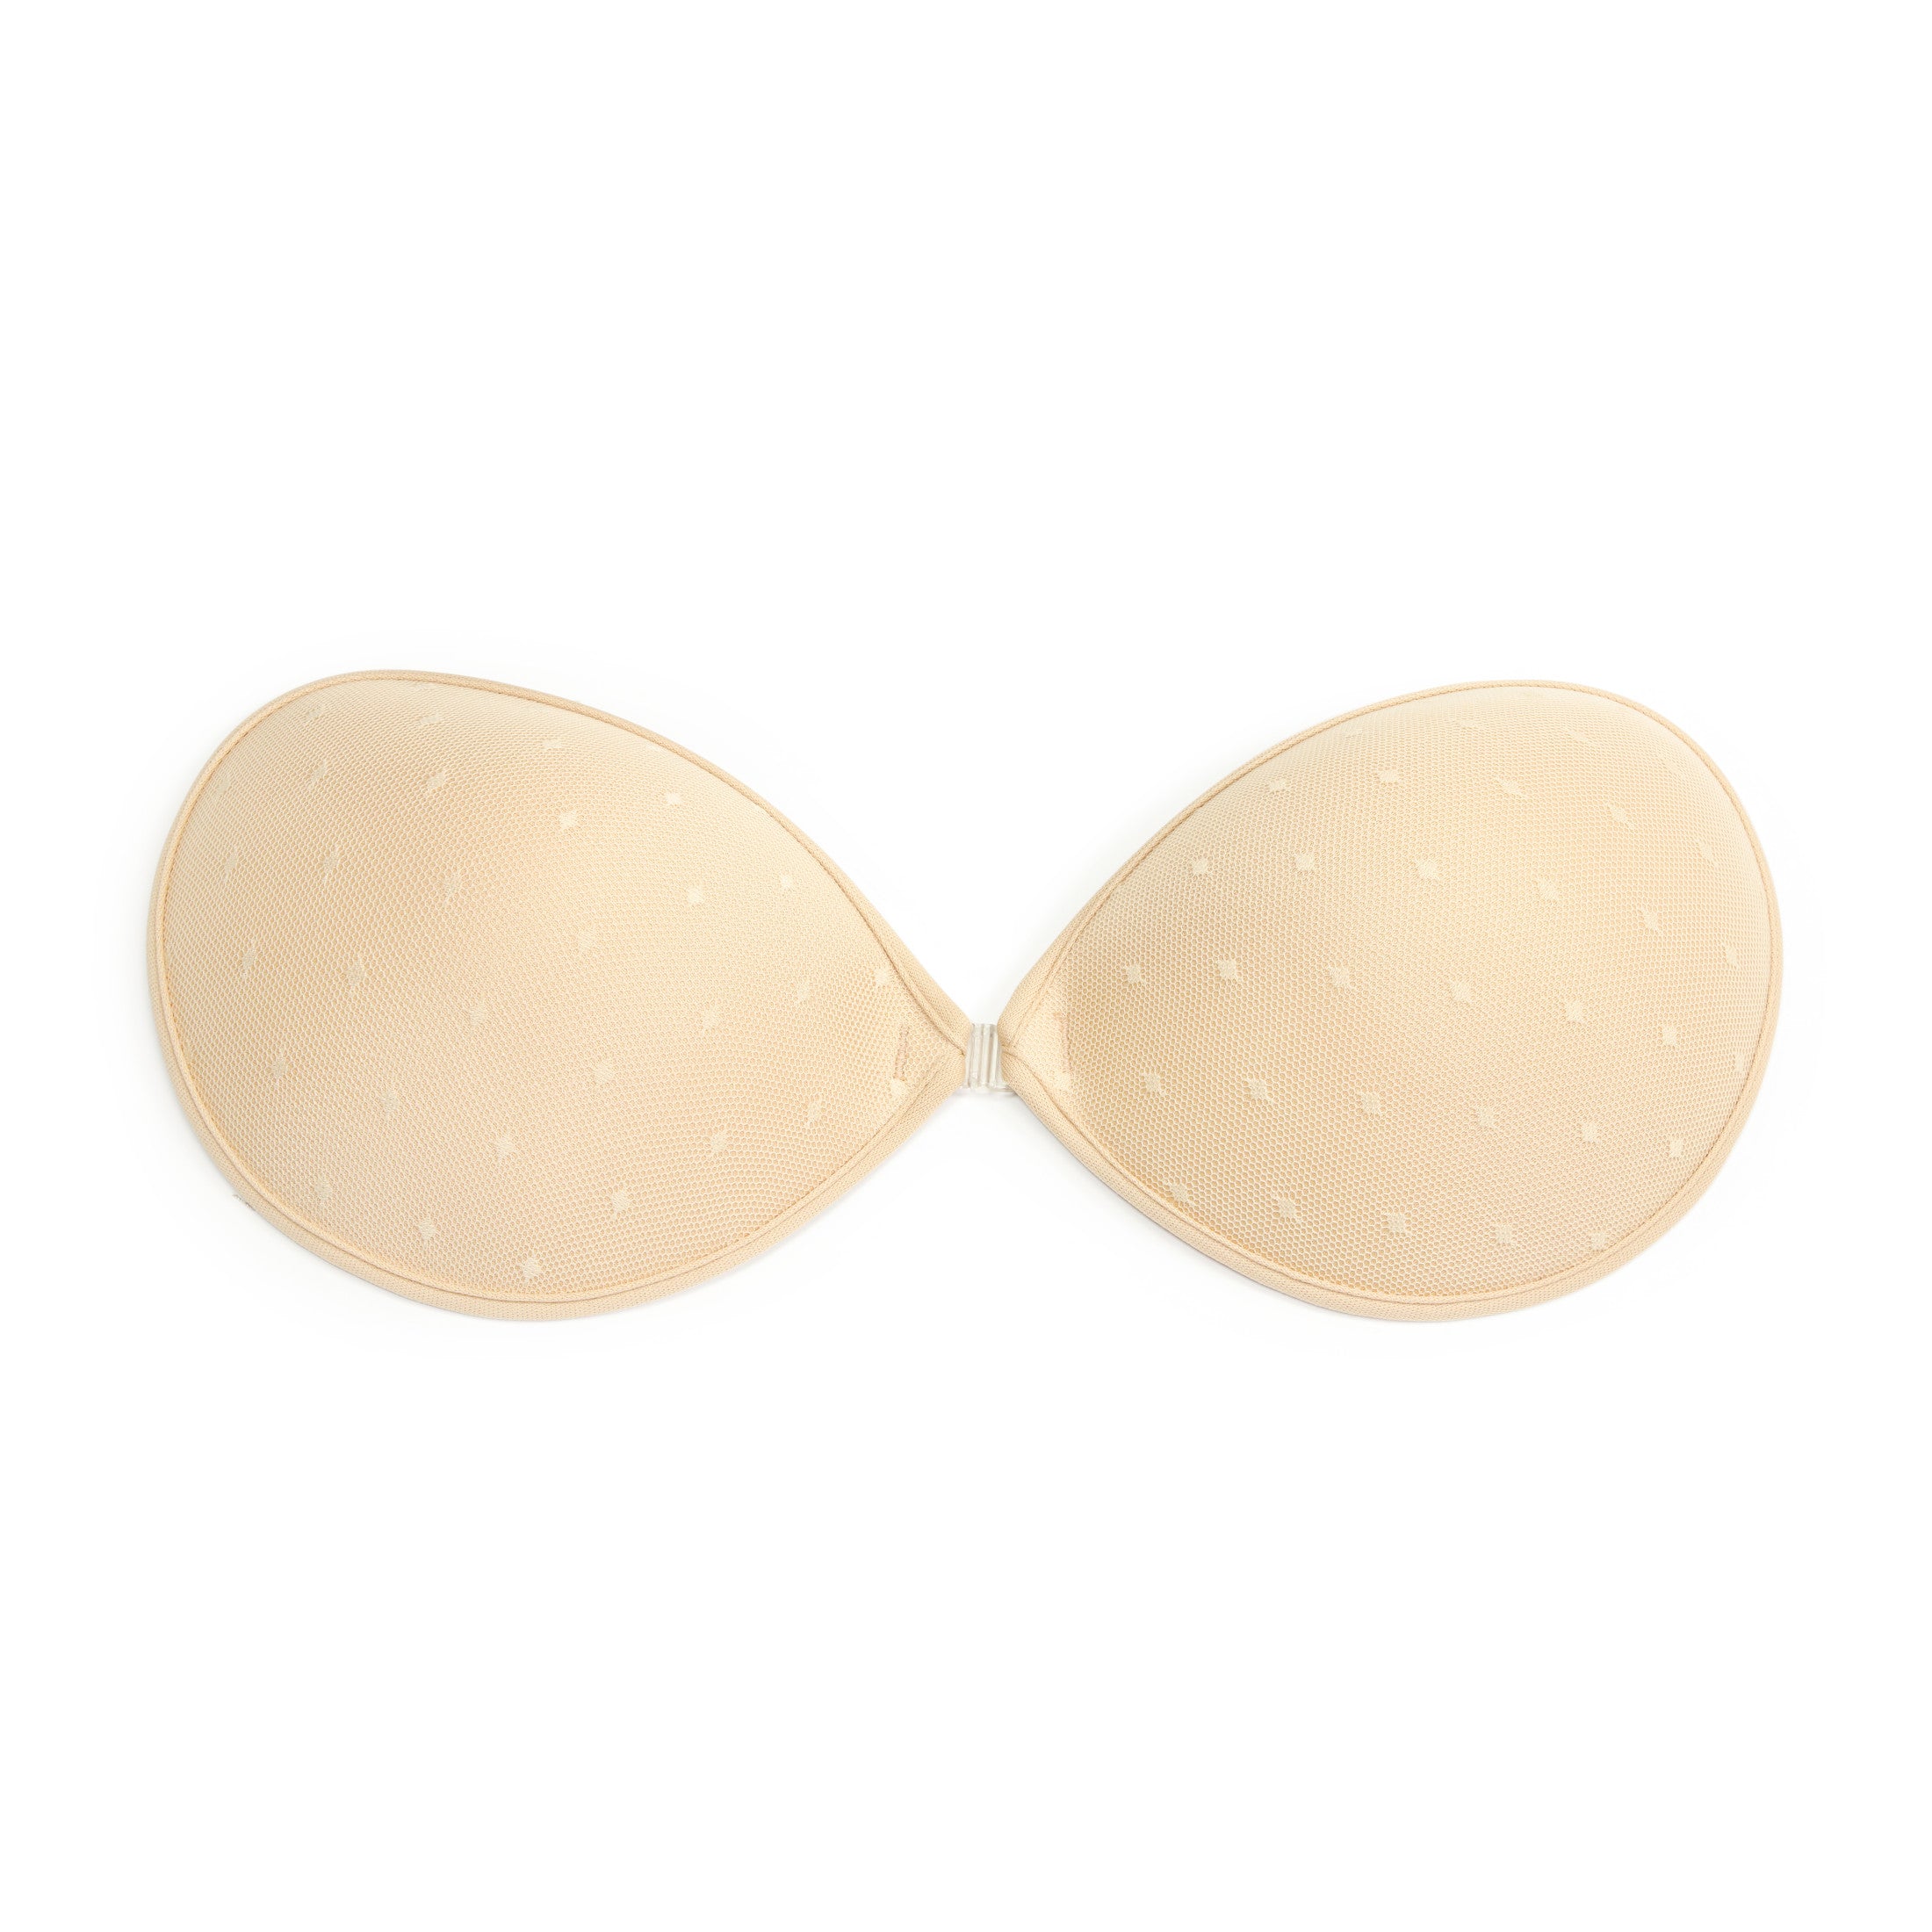 Dritz womens Soft Molded Sew-in Bra Cups, Natural, AB US